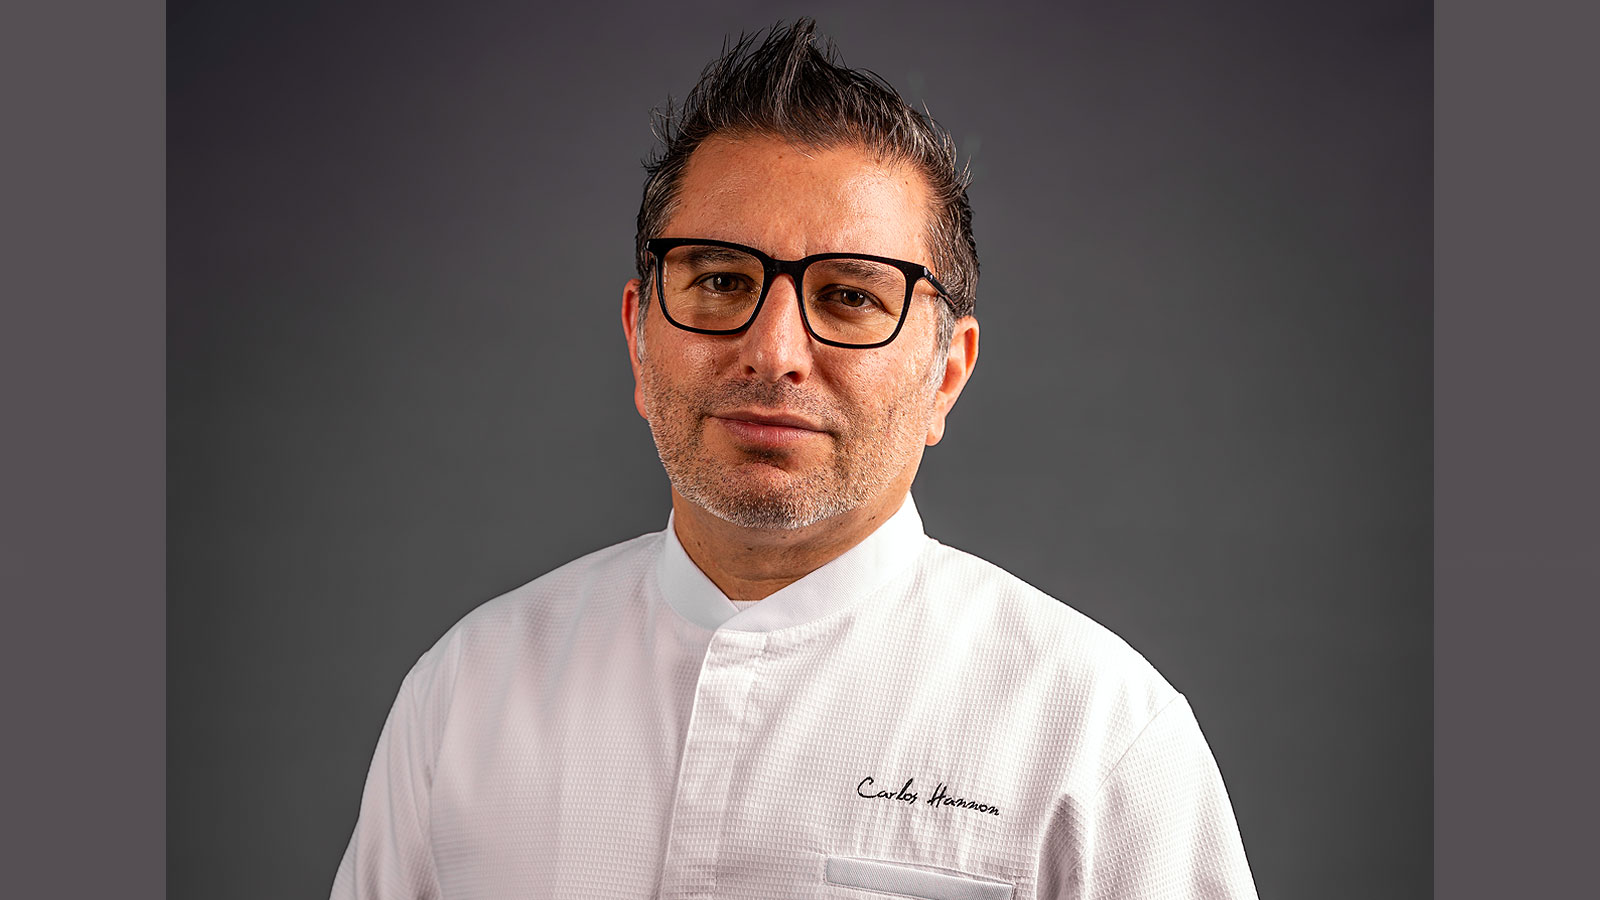 Grupo Xcaret names Chef Carlos Hannon as new Culinary Director for Hoteles Xcaret